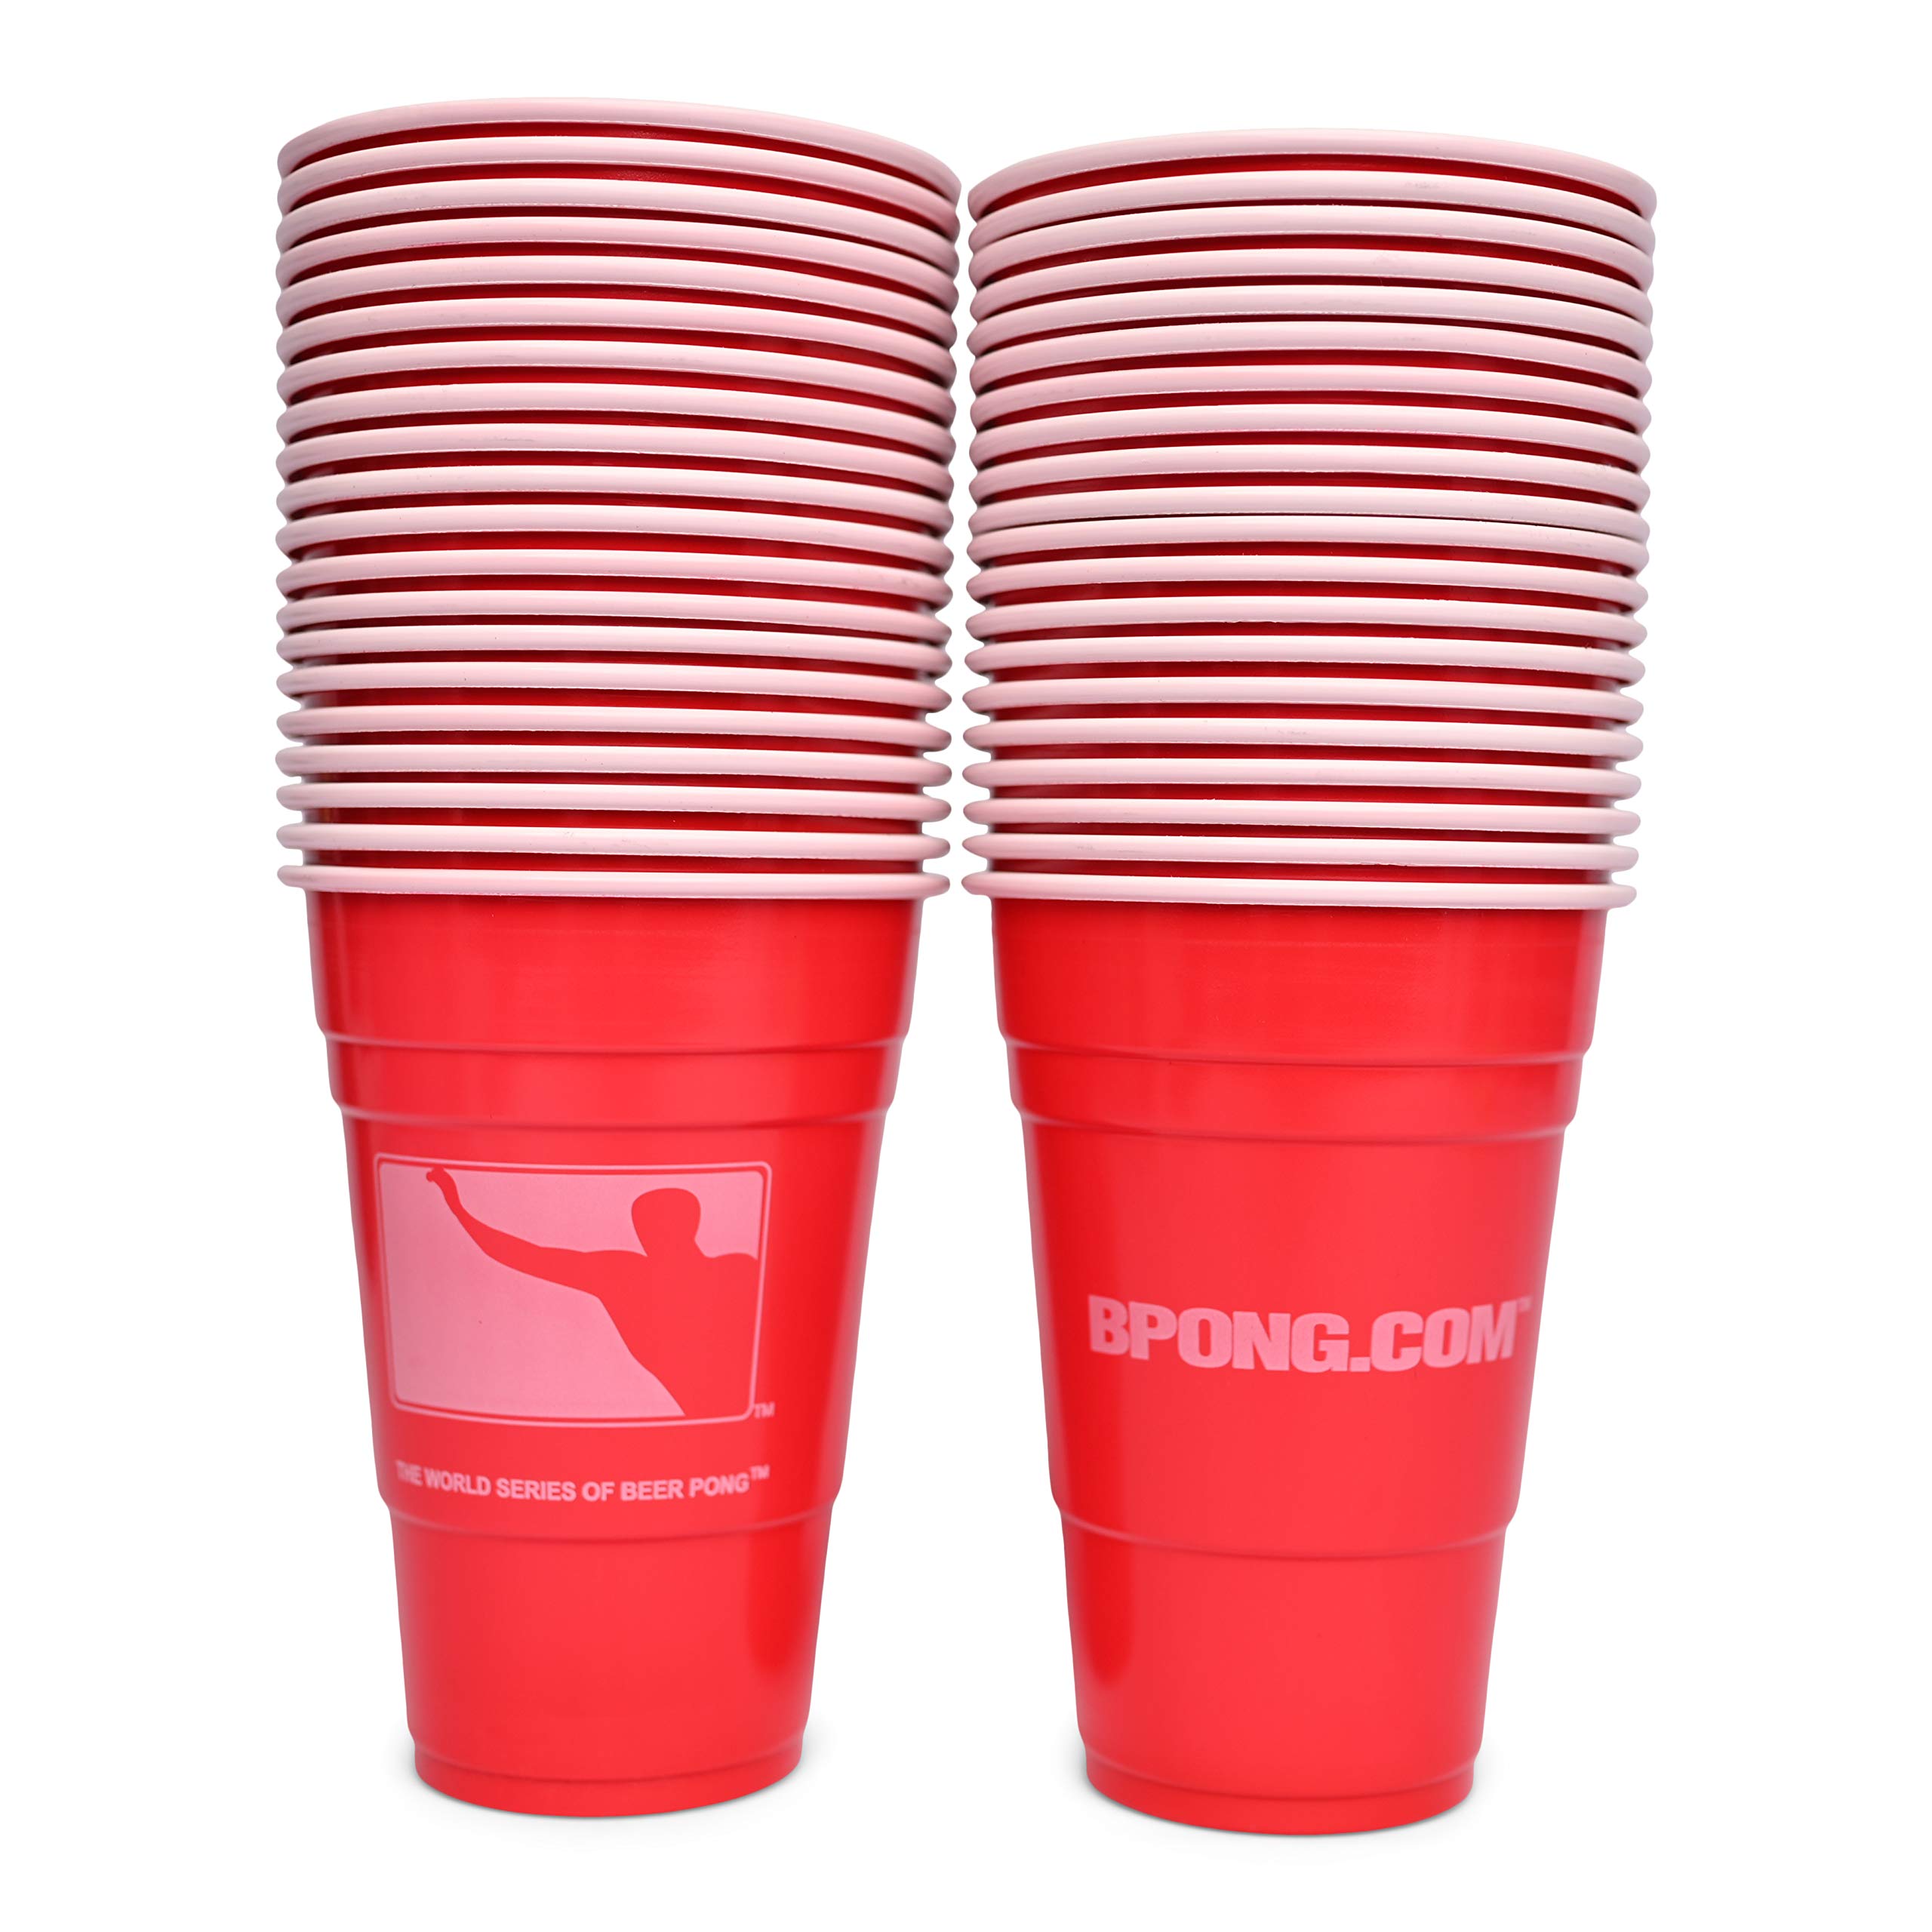 https://bpong.com/wp-content/uploads/2020/12/CUP03B-40PK-beer-pong-red-party-cups.jpg